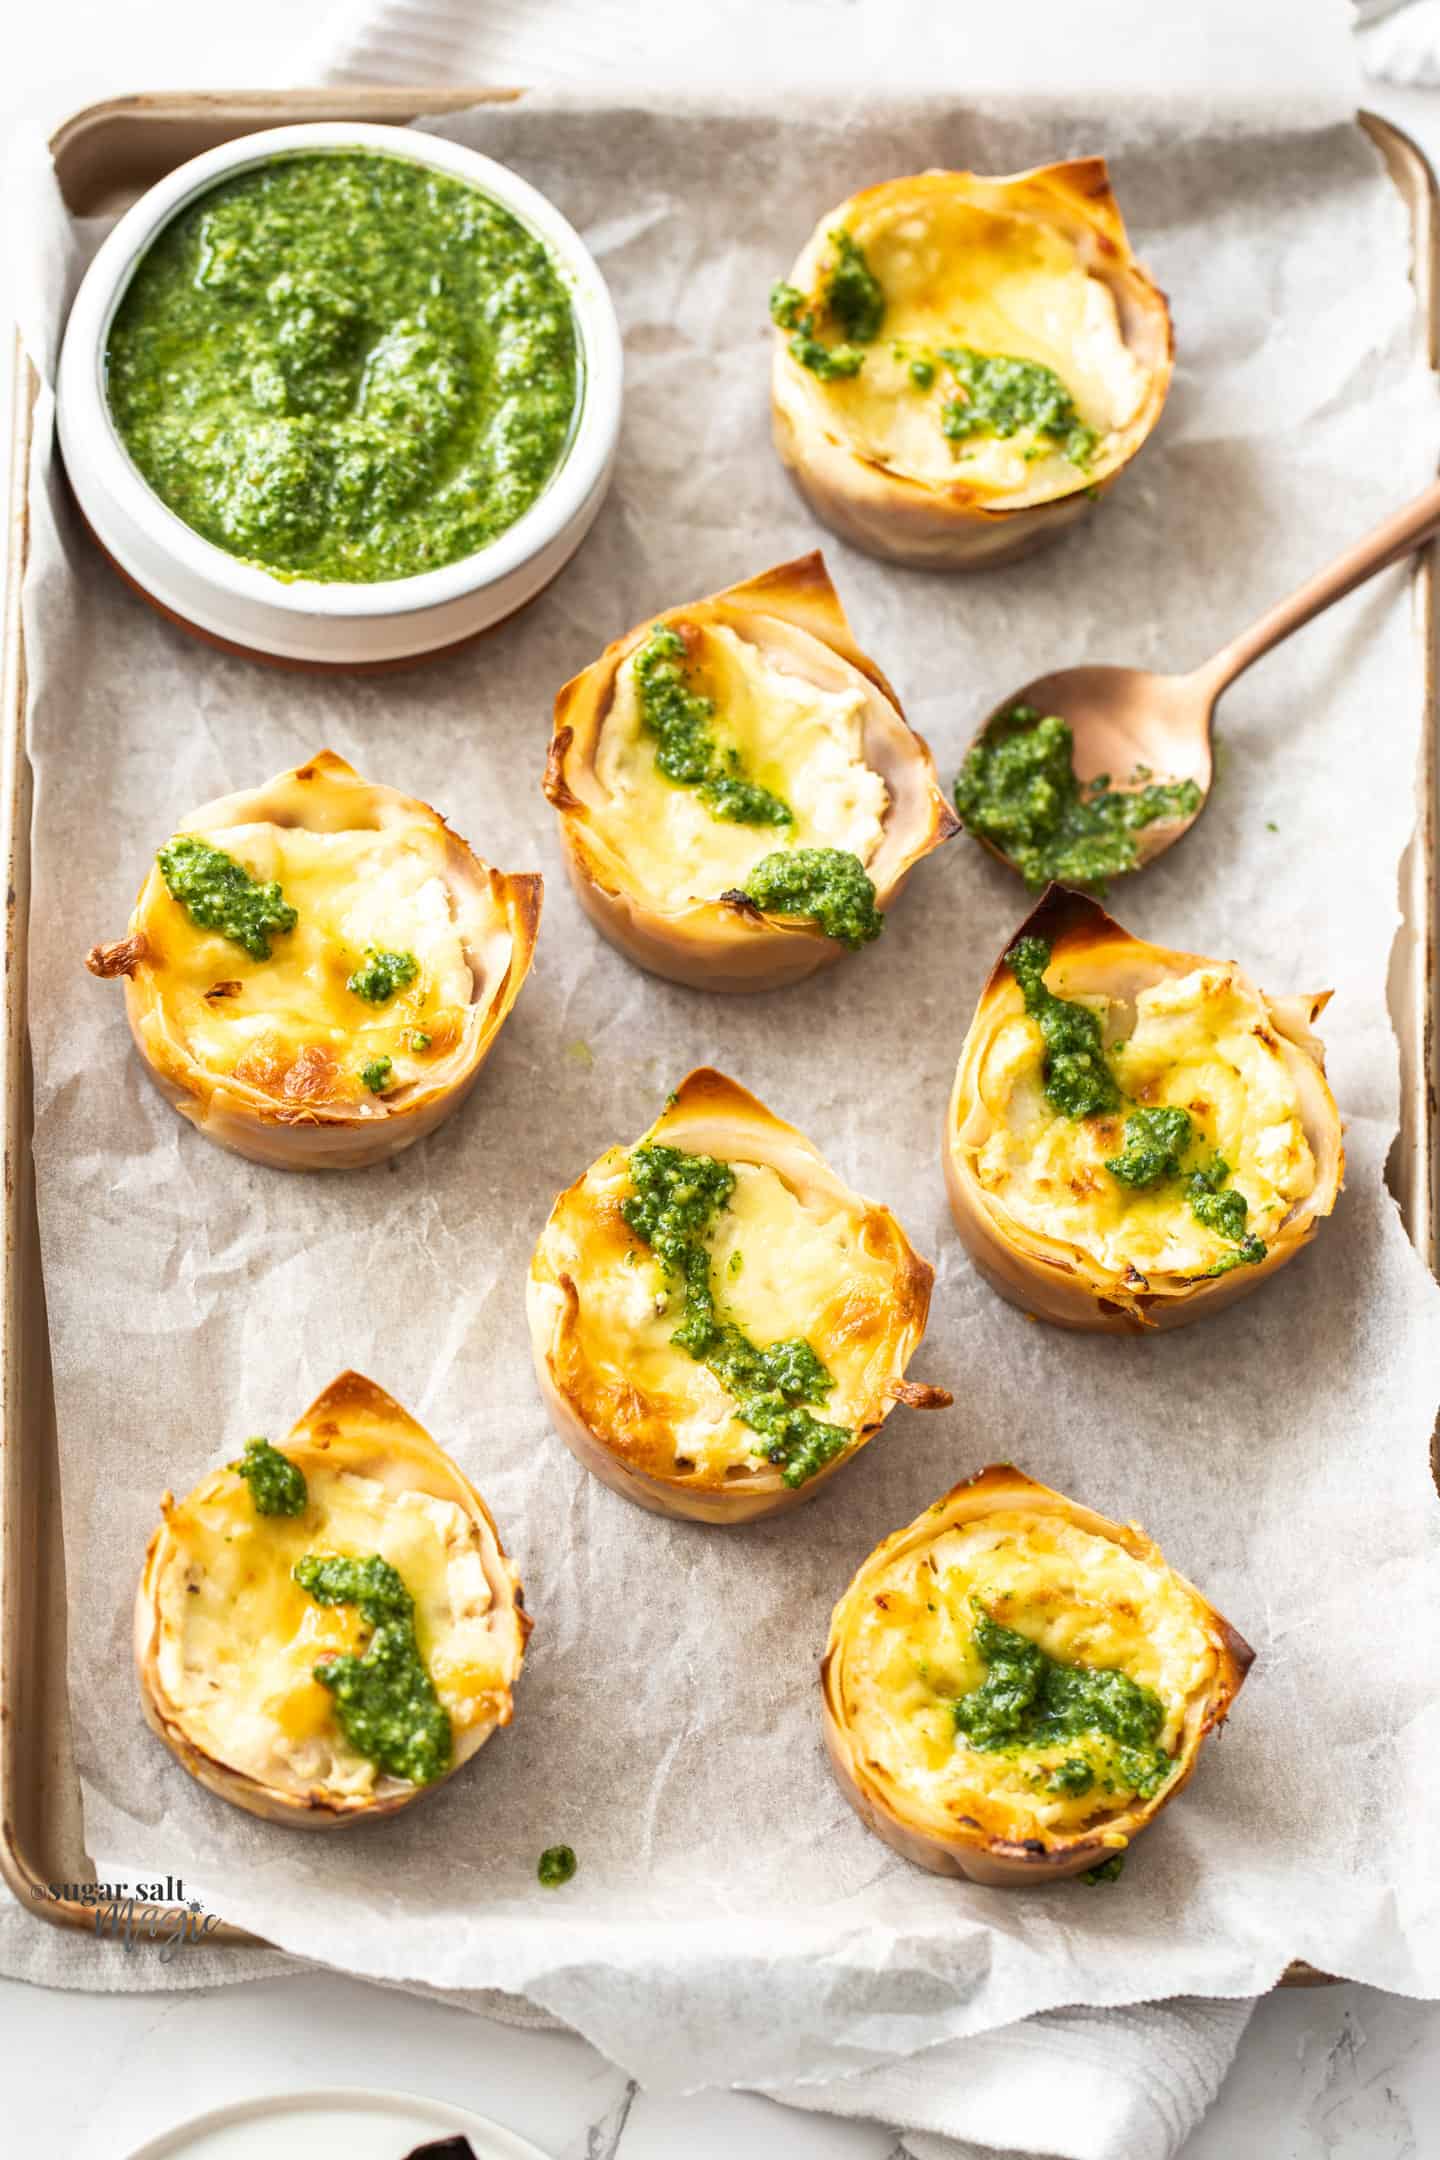 7 lasagna cupcakes sitting on a baking paper lined tray with a bowl of pesto.